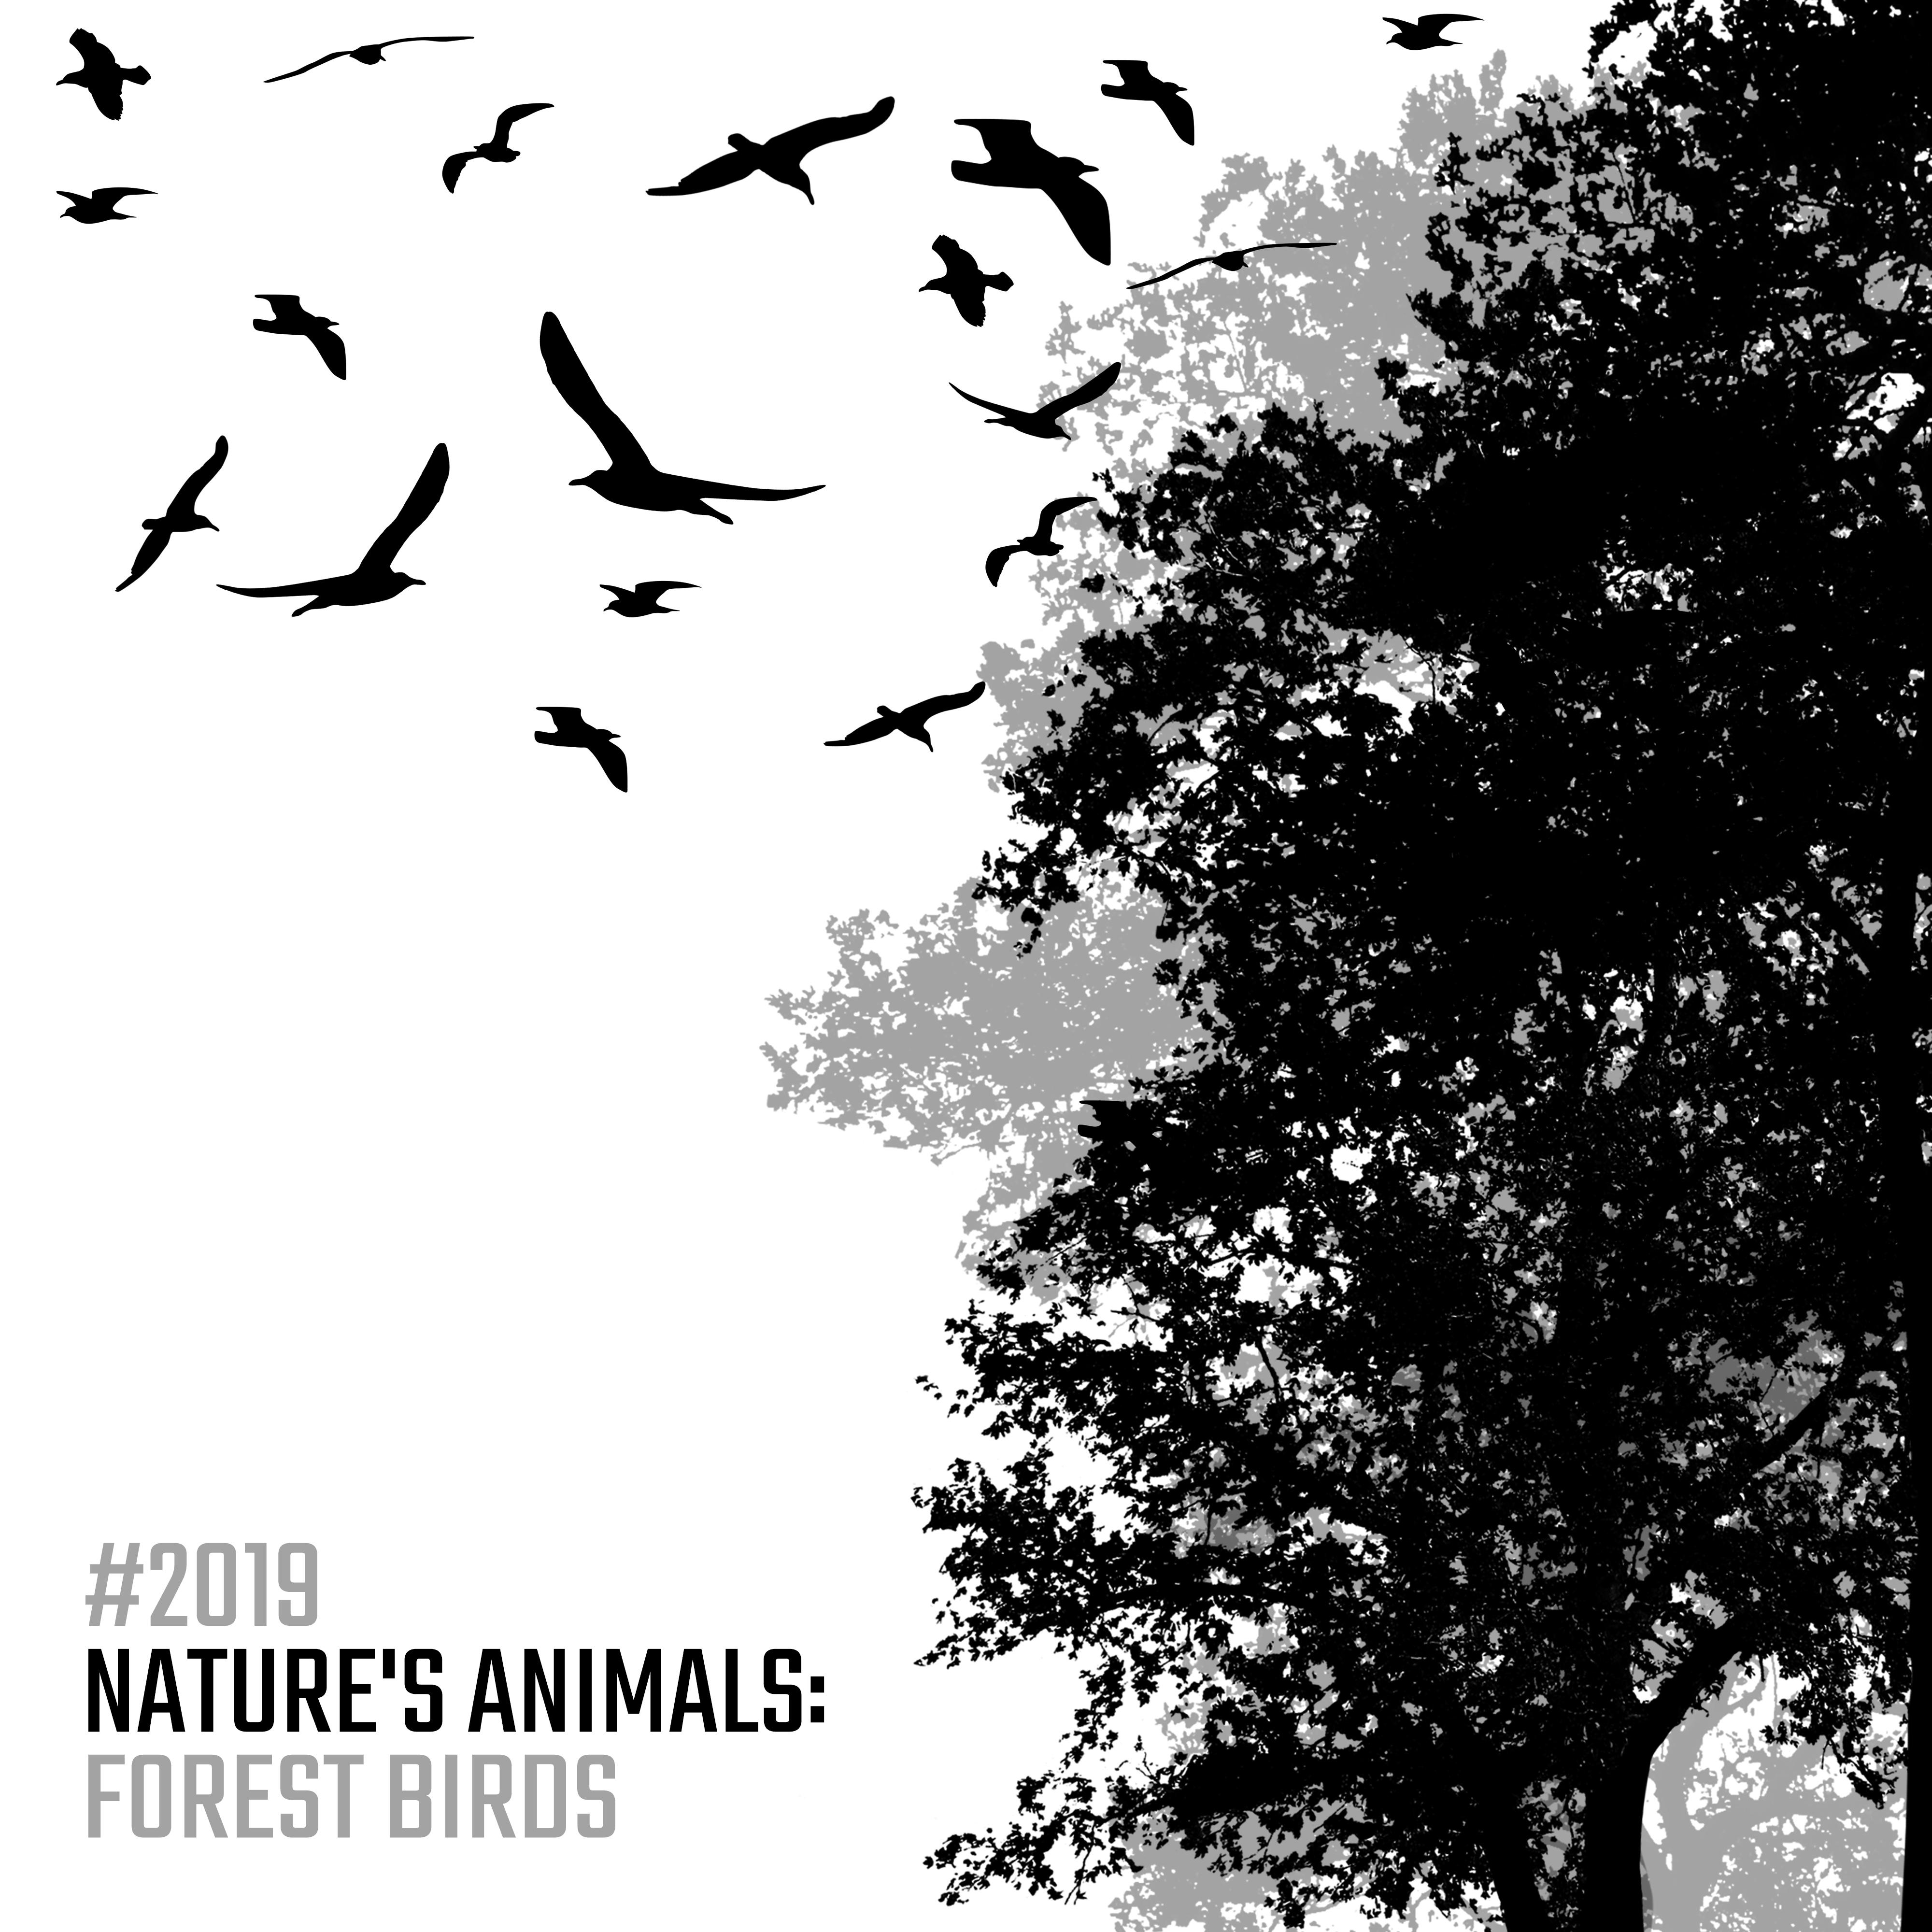 2019 Nature' s Animals: Forest Birds  Compilation of New Age Music with the Sounds of Birds and Piano Compositions